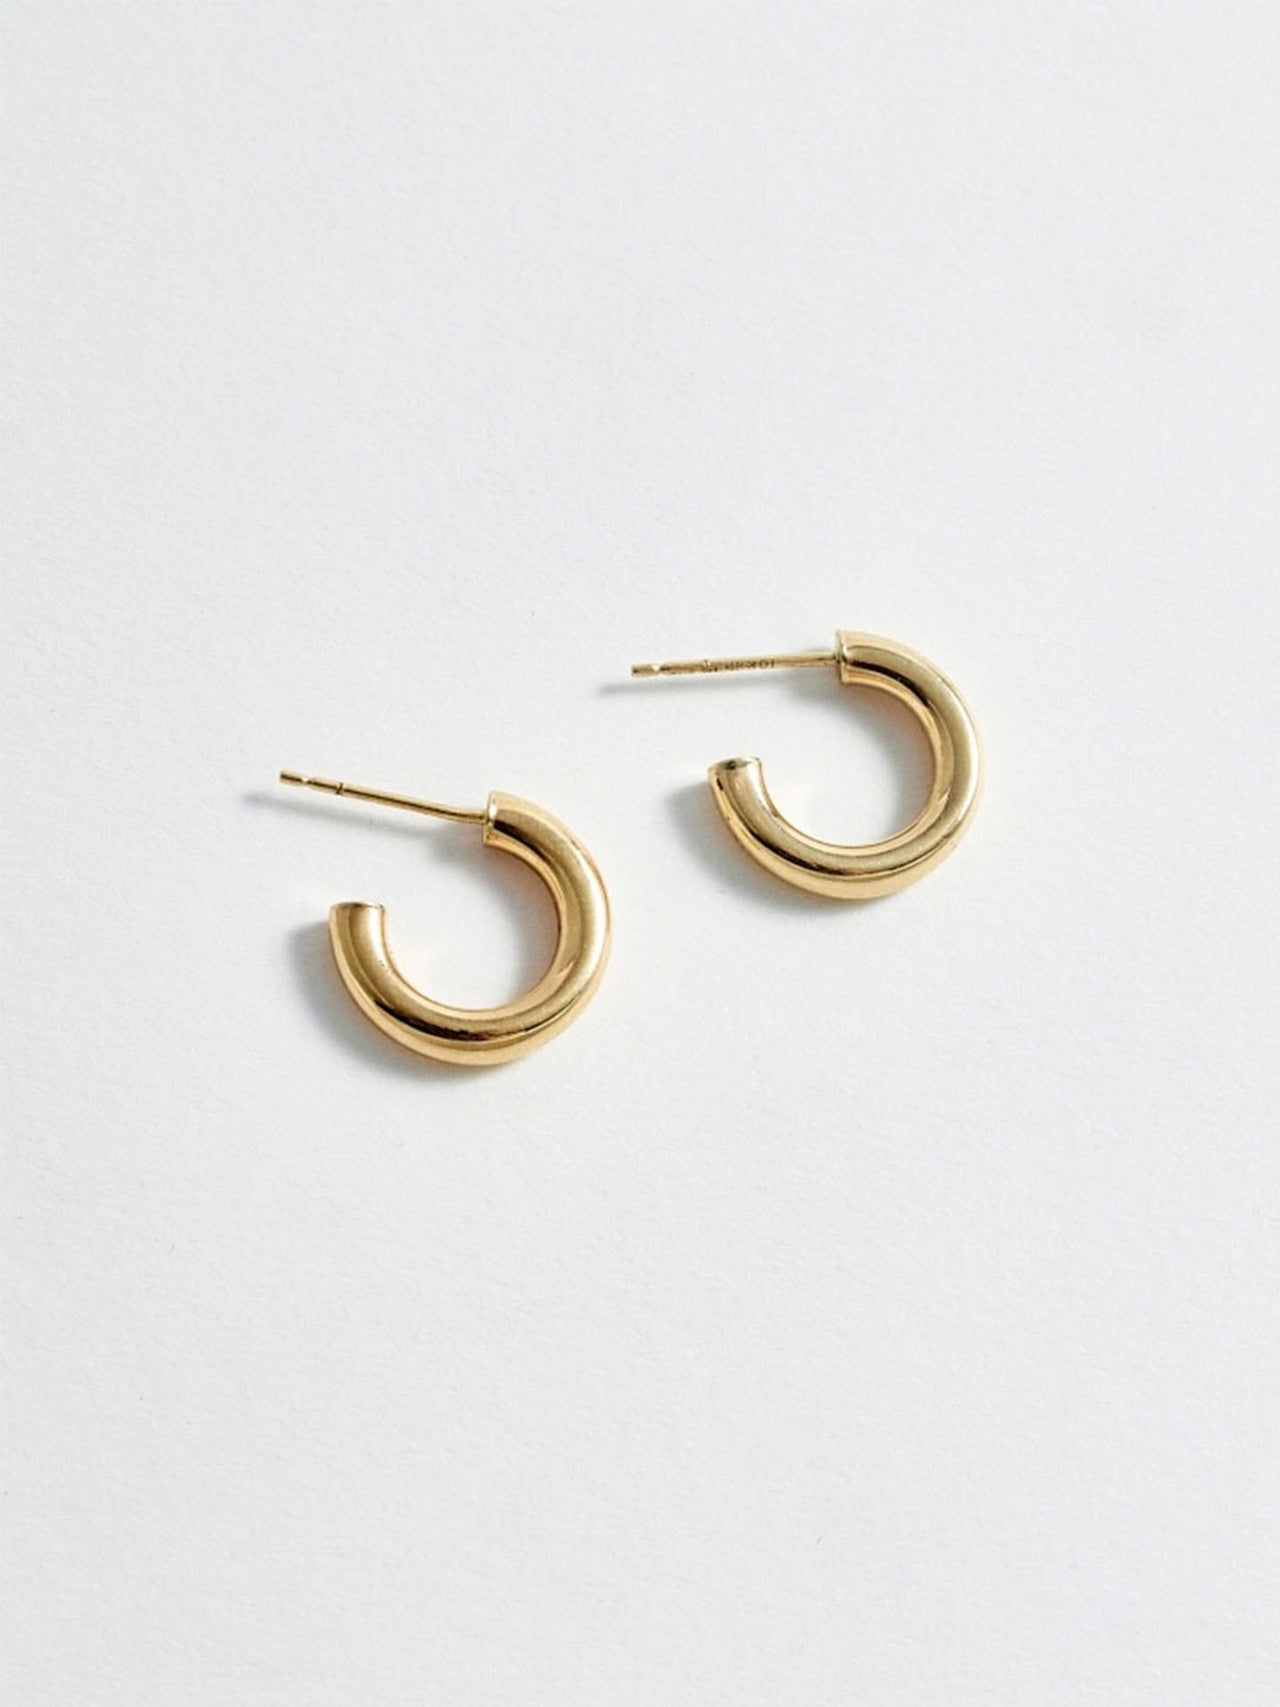 Product shot of the Chubbie Huggies (10Kt shinyYellow Gold Mini Tube Hoop Earrings Diameter: 16.51mm Thickness: 3mm) Background: Grey Backdrop